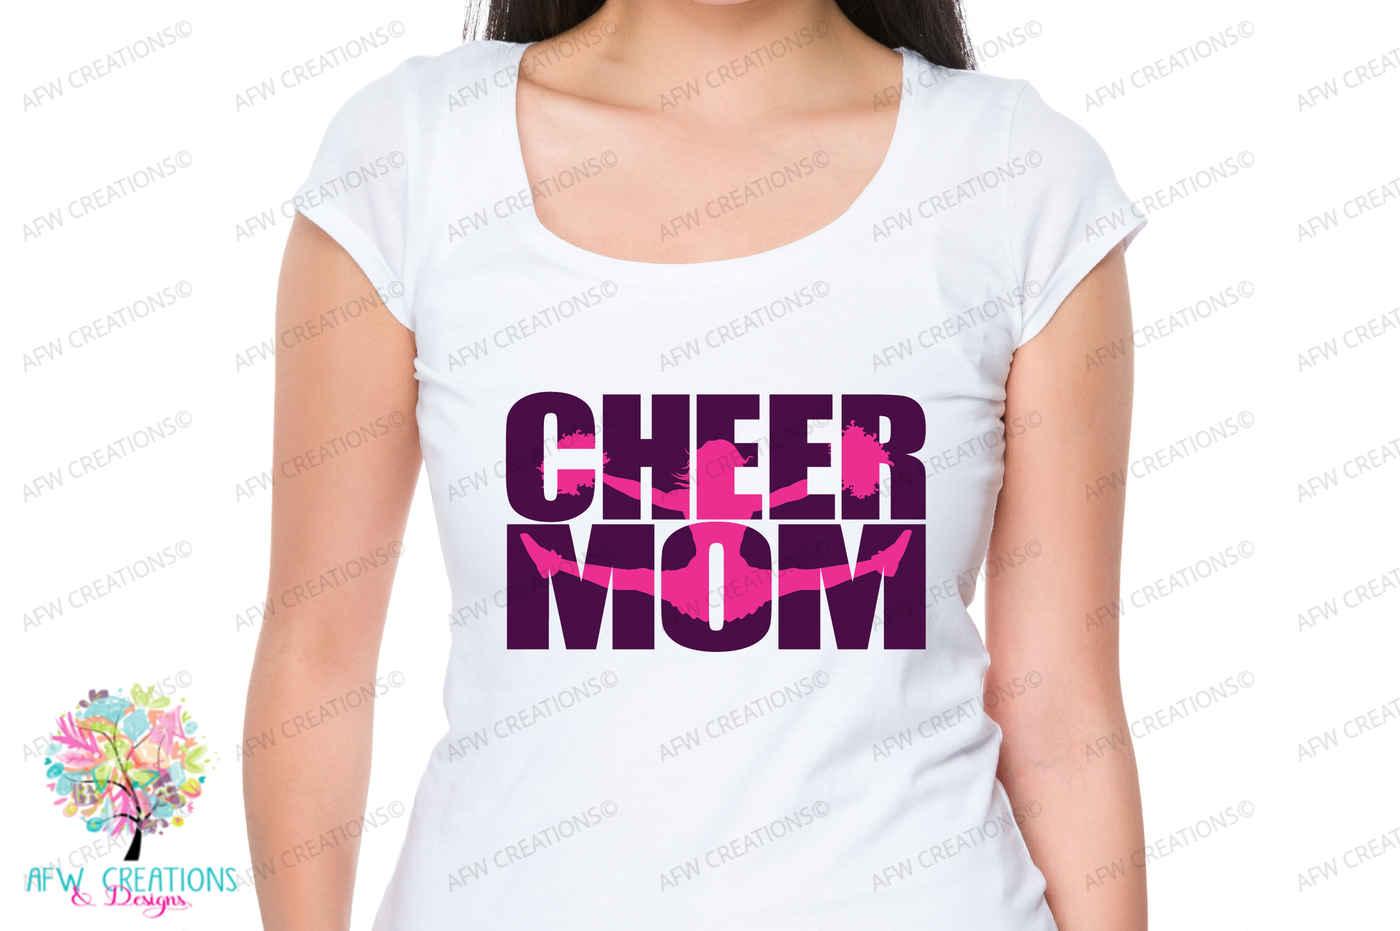 Cheer Mom - SVG, DXF, EPS Cut File By AFW Designs | TheHungryJPEG.com